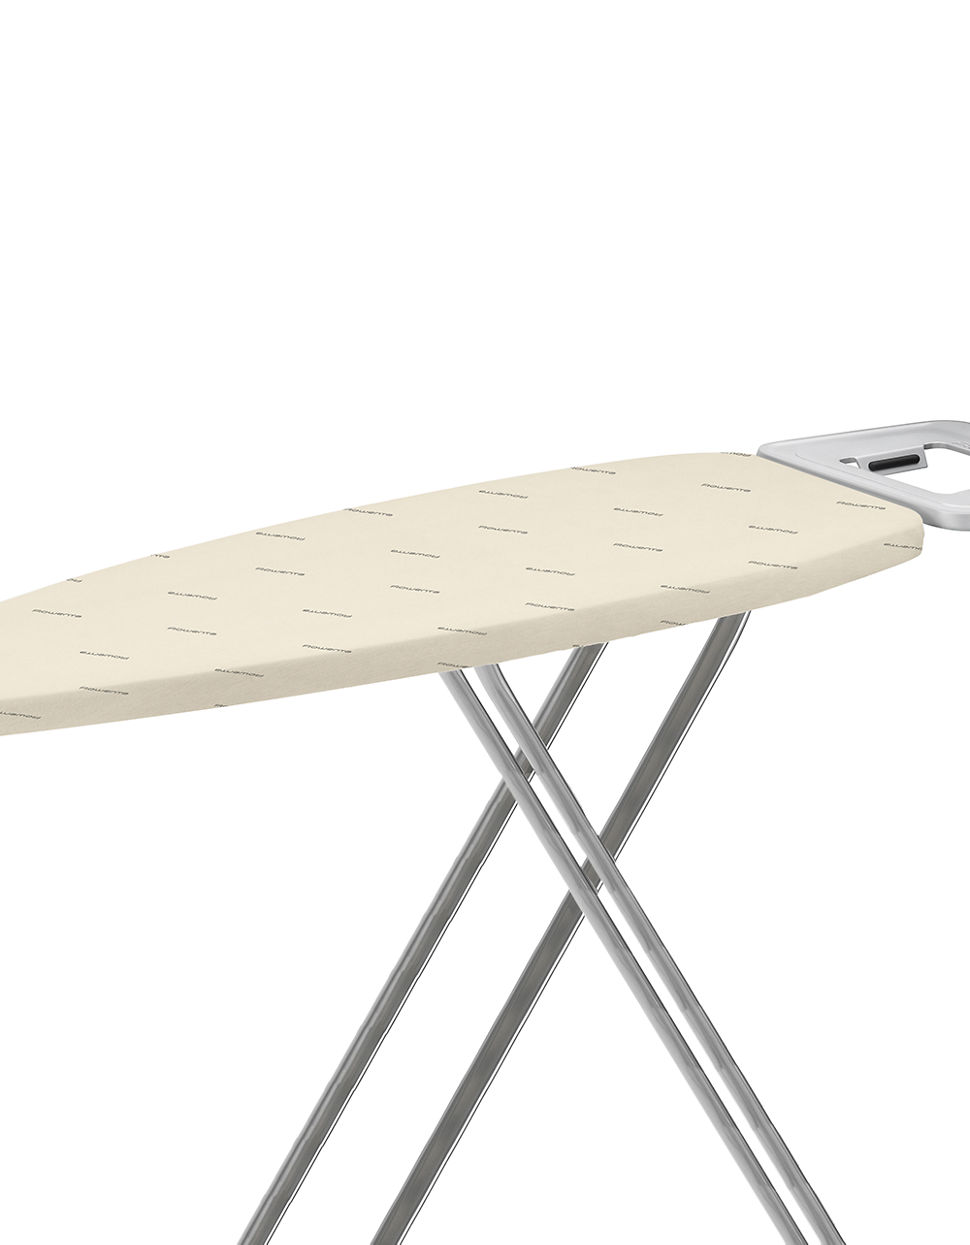 What do reviews generally say about Rowenta ironing boards?